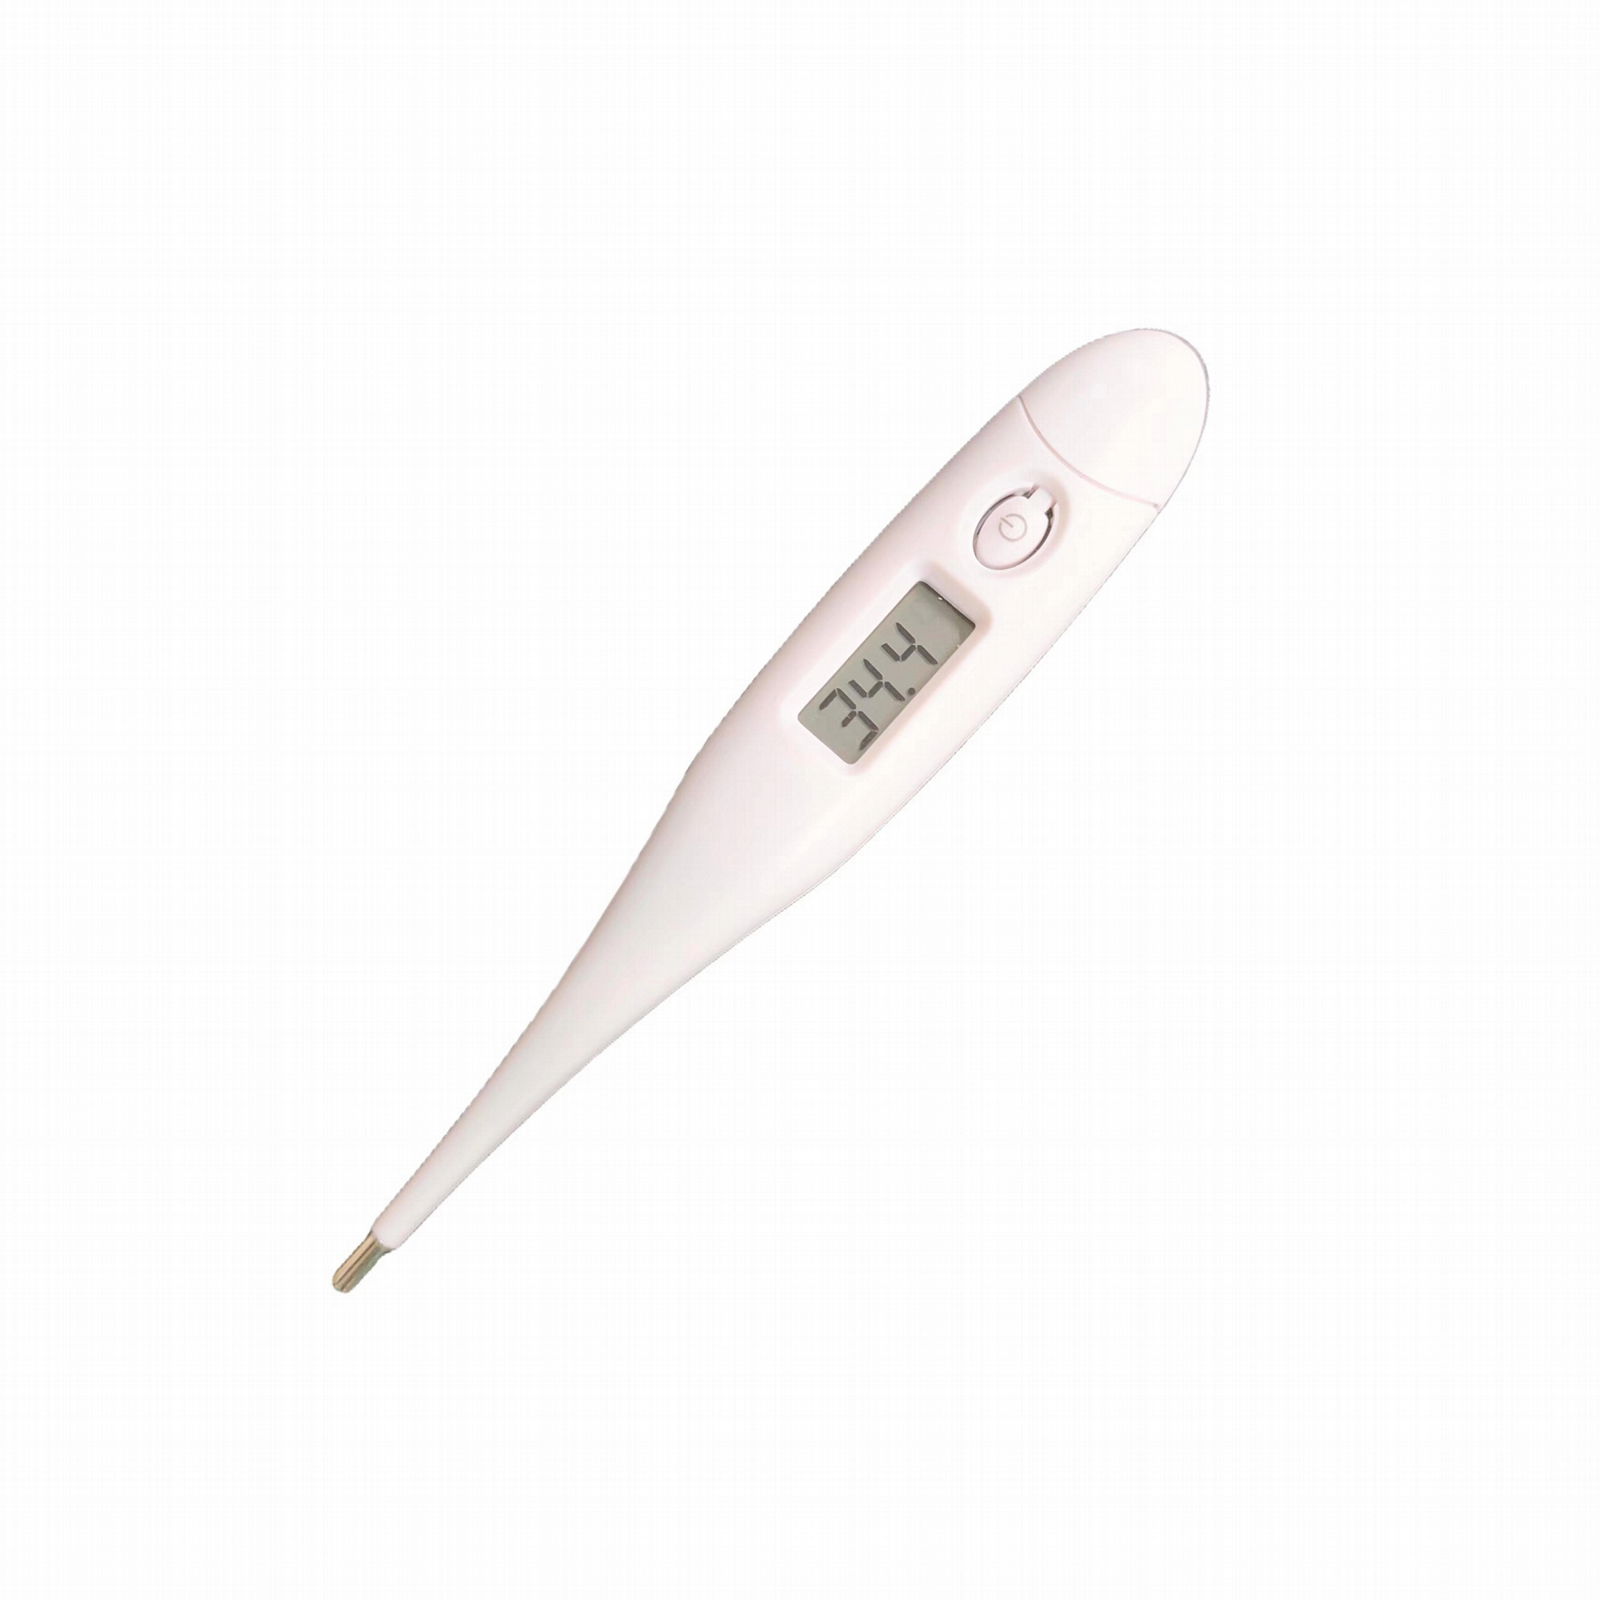 MT803   Digital clinical thermometer 5